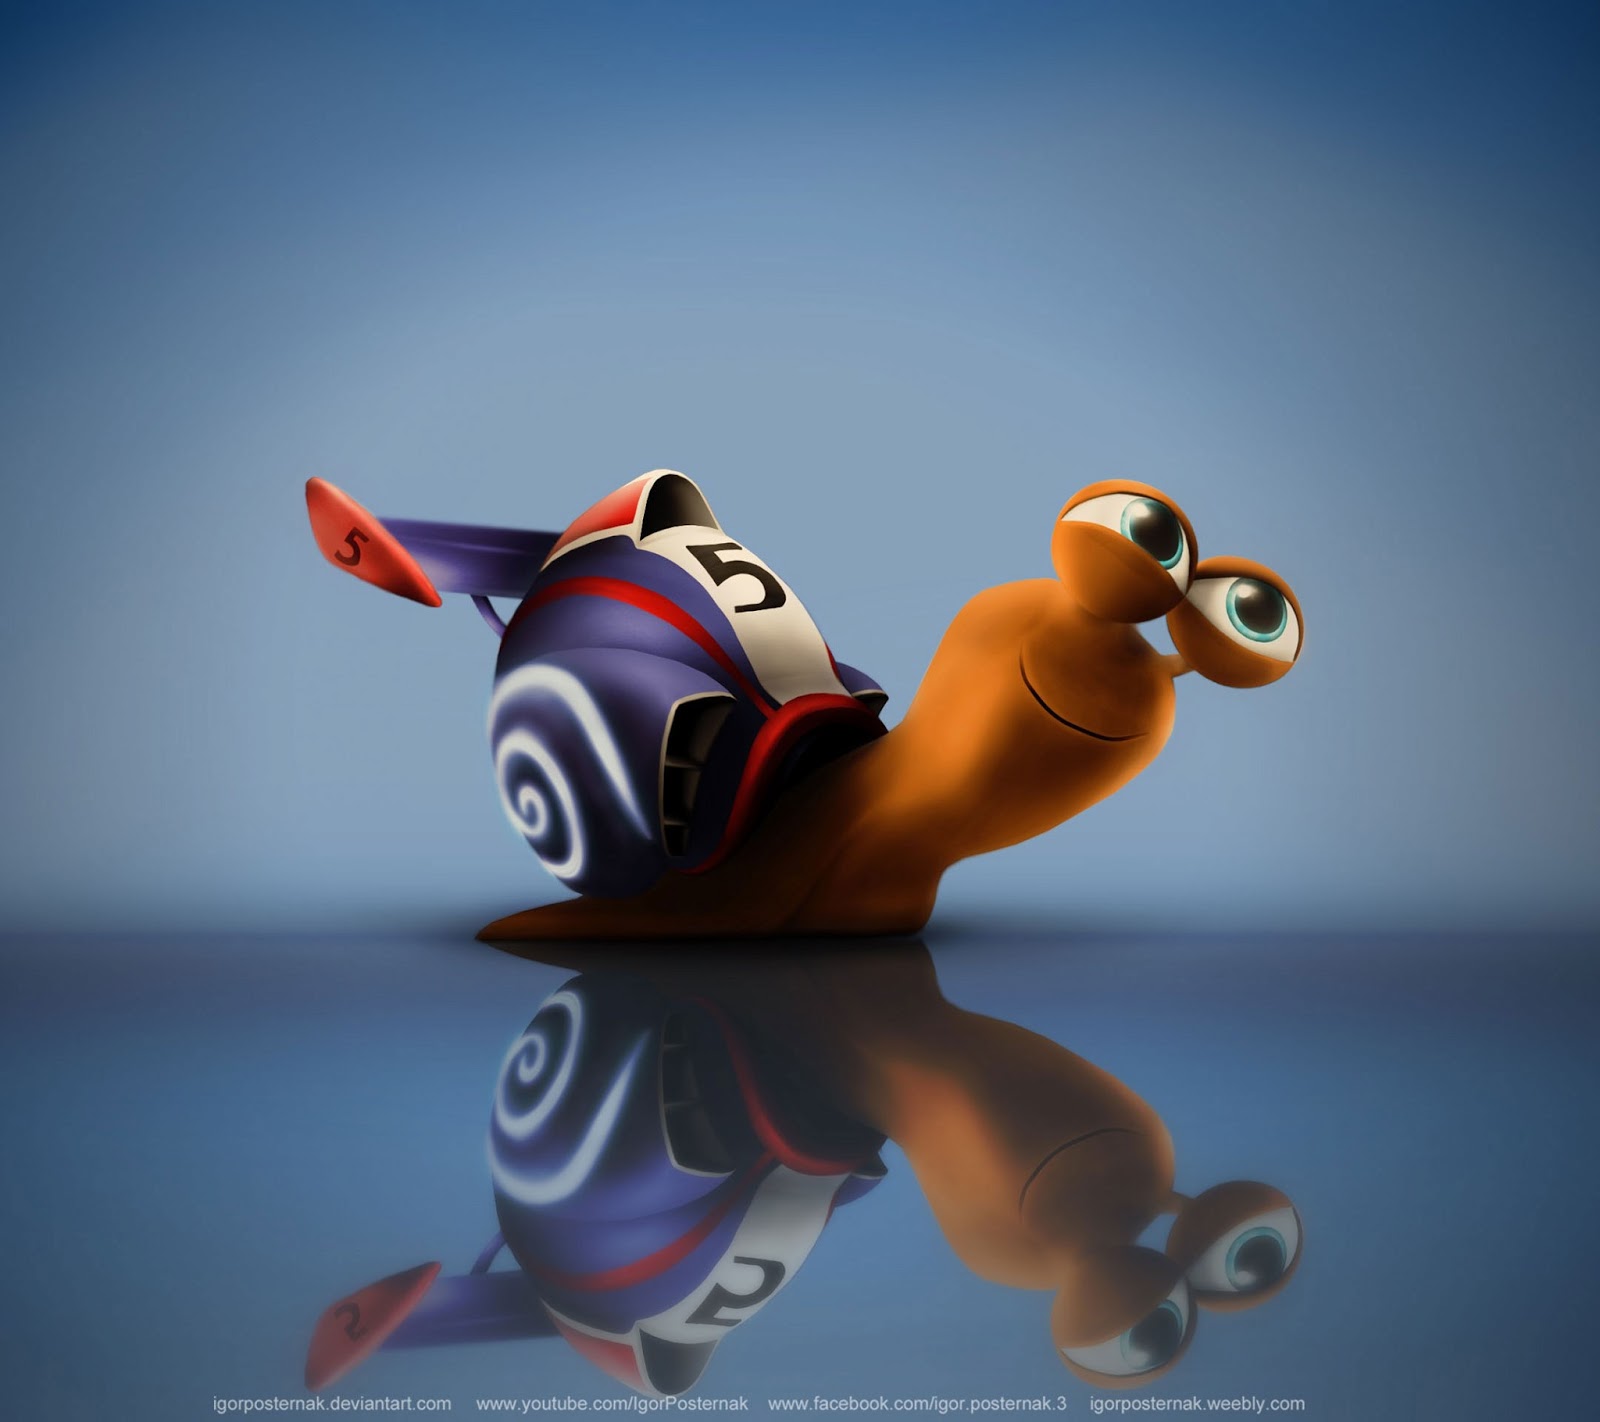 Galaxy S4 Wallpaper - Turbo Movie - HD Wallpapers - 9to5Wallpapers